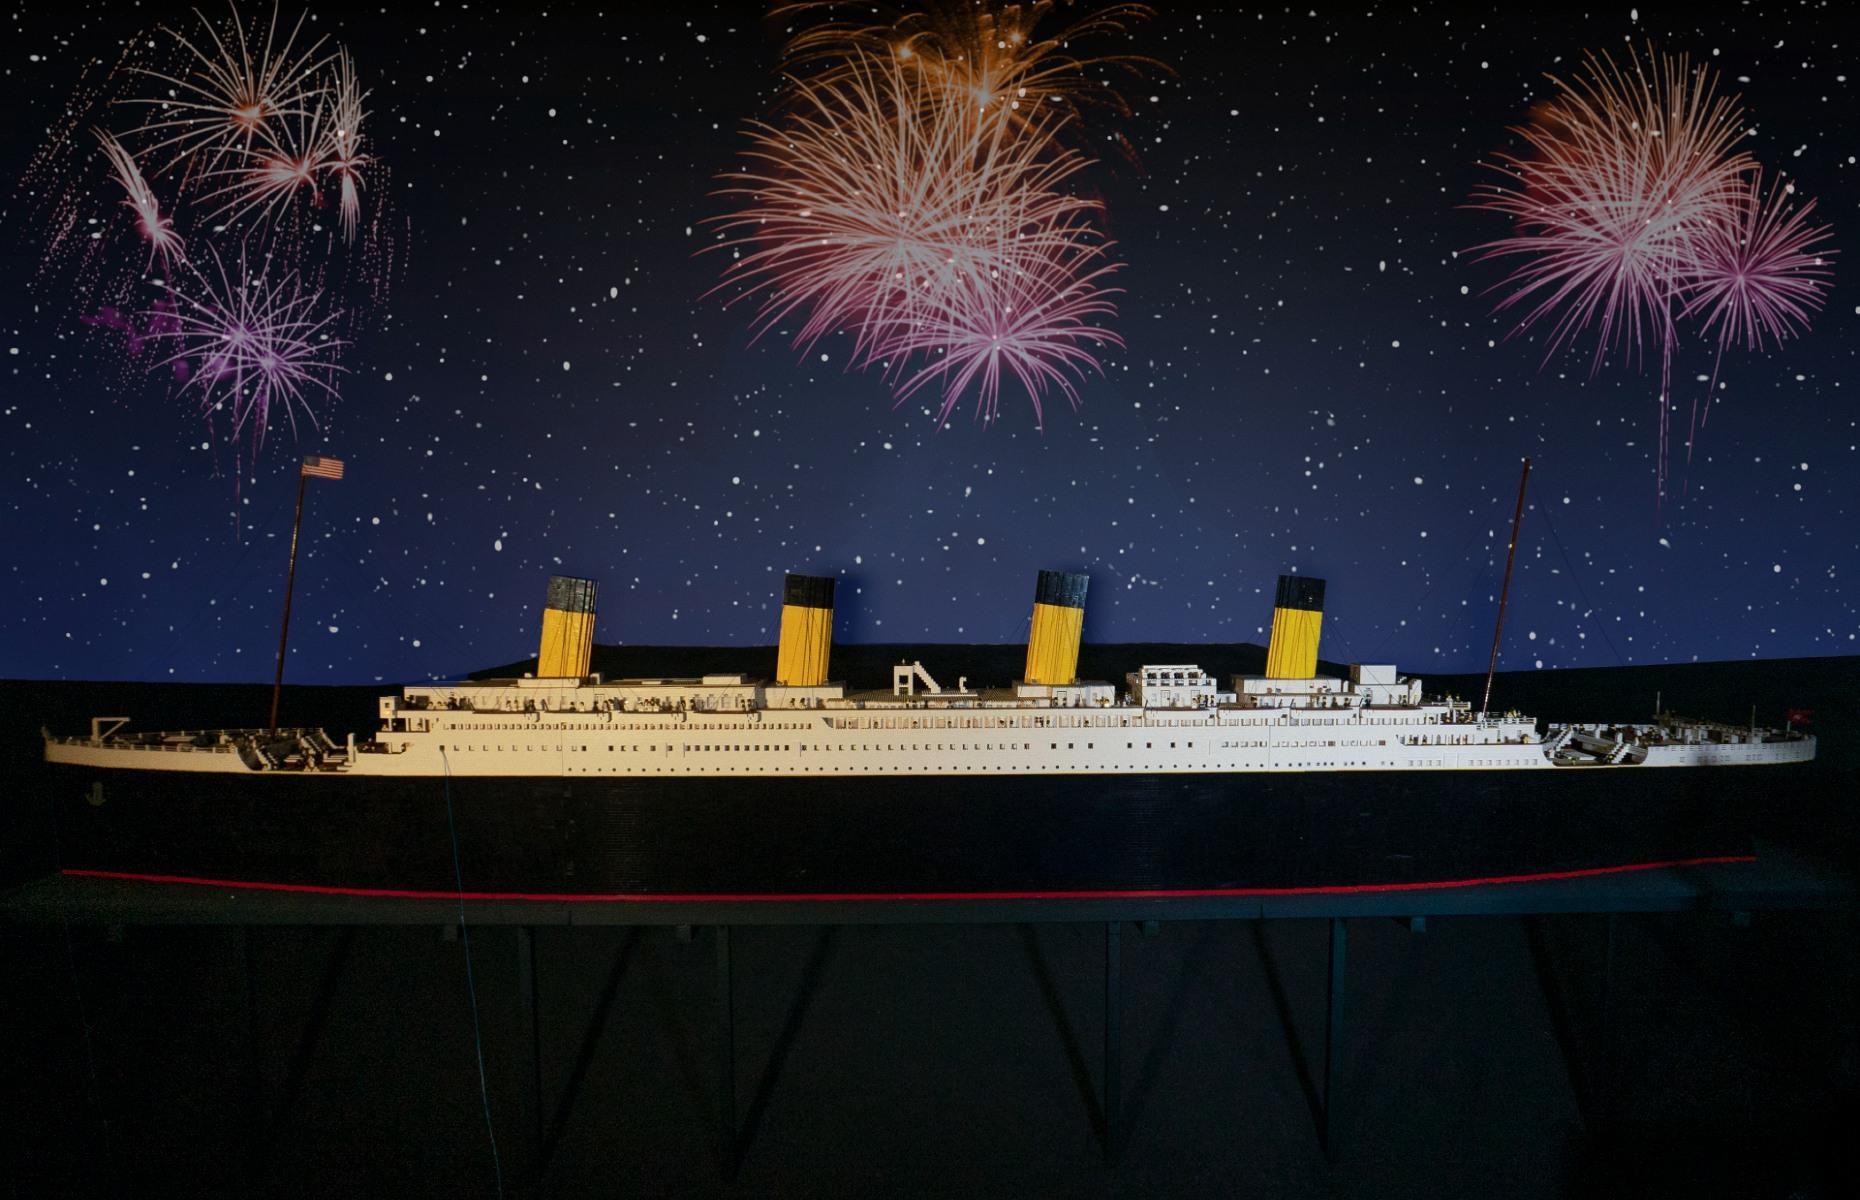 <p>The museum also contains the world's largest replica of the Titanic made entirely from LEGO. It is 26 feet (8m) in length and five feet (1.5m) tall and contains 56,000 bricks. Most impressively it was built by <a href="https://www.mypigeonforge.com/event/titanic-lego-display">Icelander Brynjar Birgisson when he was only 10 years old</a>. He spent 11 months creating this masterpiece with help from his grandfather and his mother who crowdfunded to raise the money. The ship has toured the world but is now on permanent display at Pigeon Forge.</p>